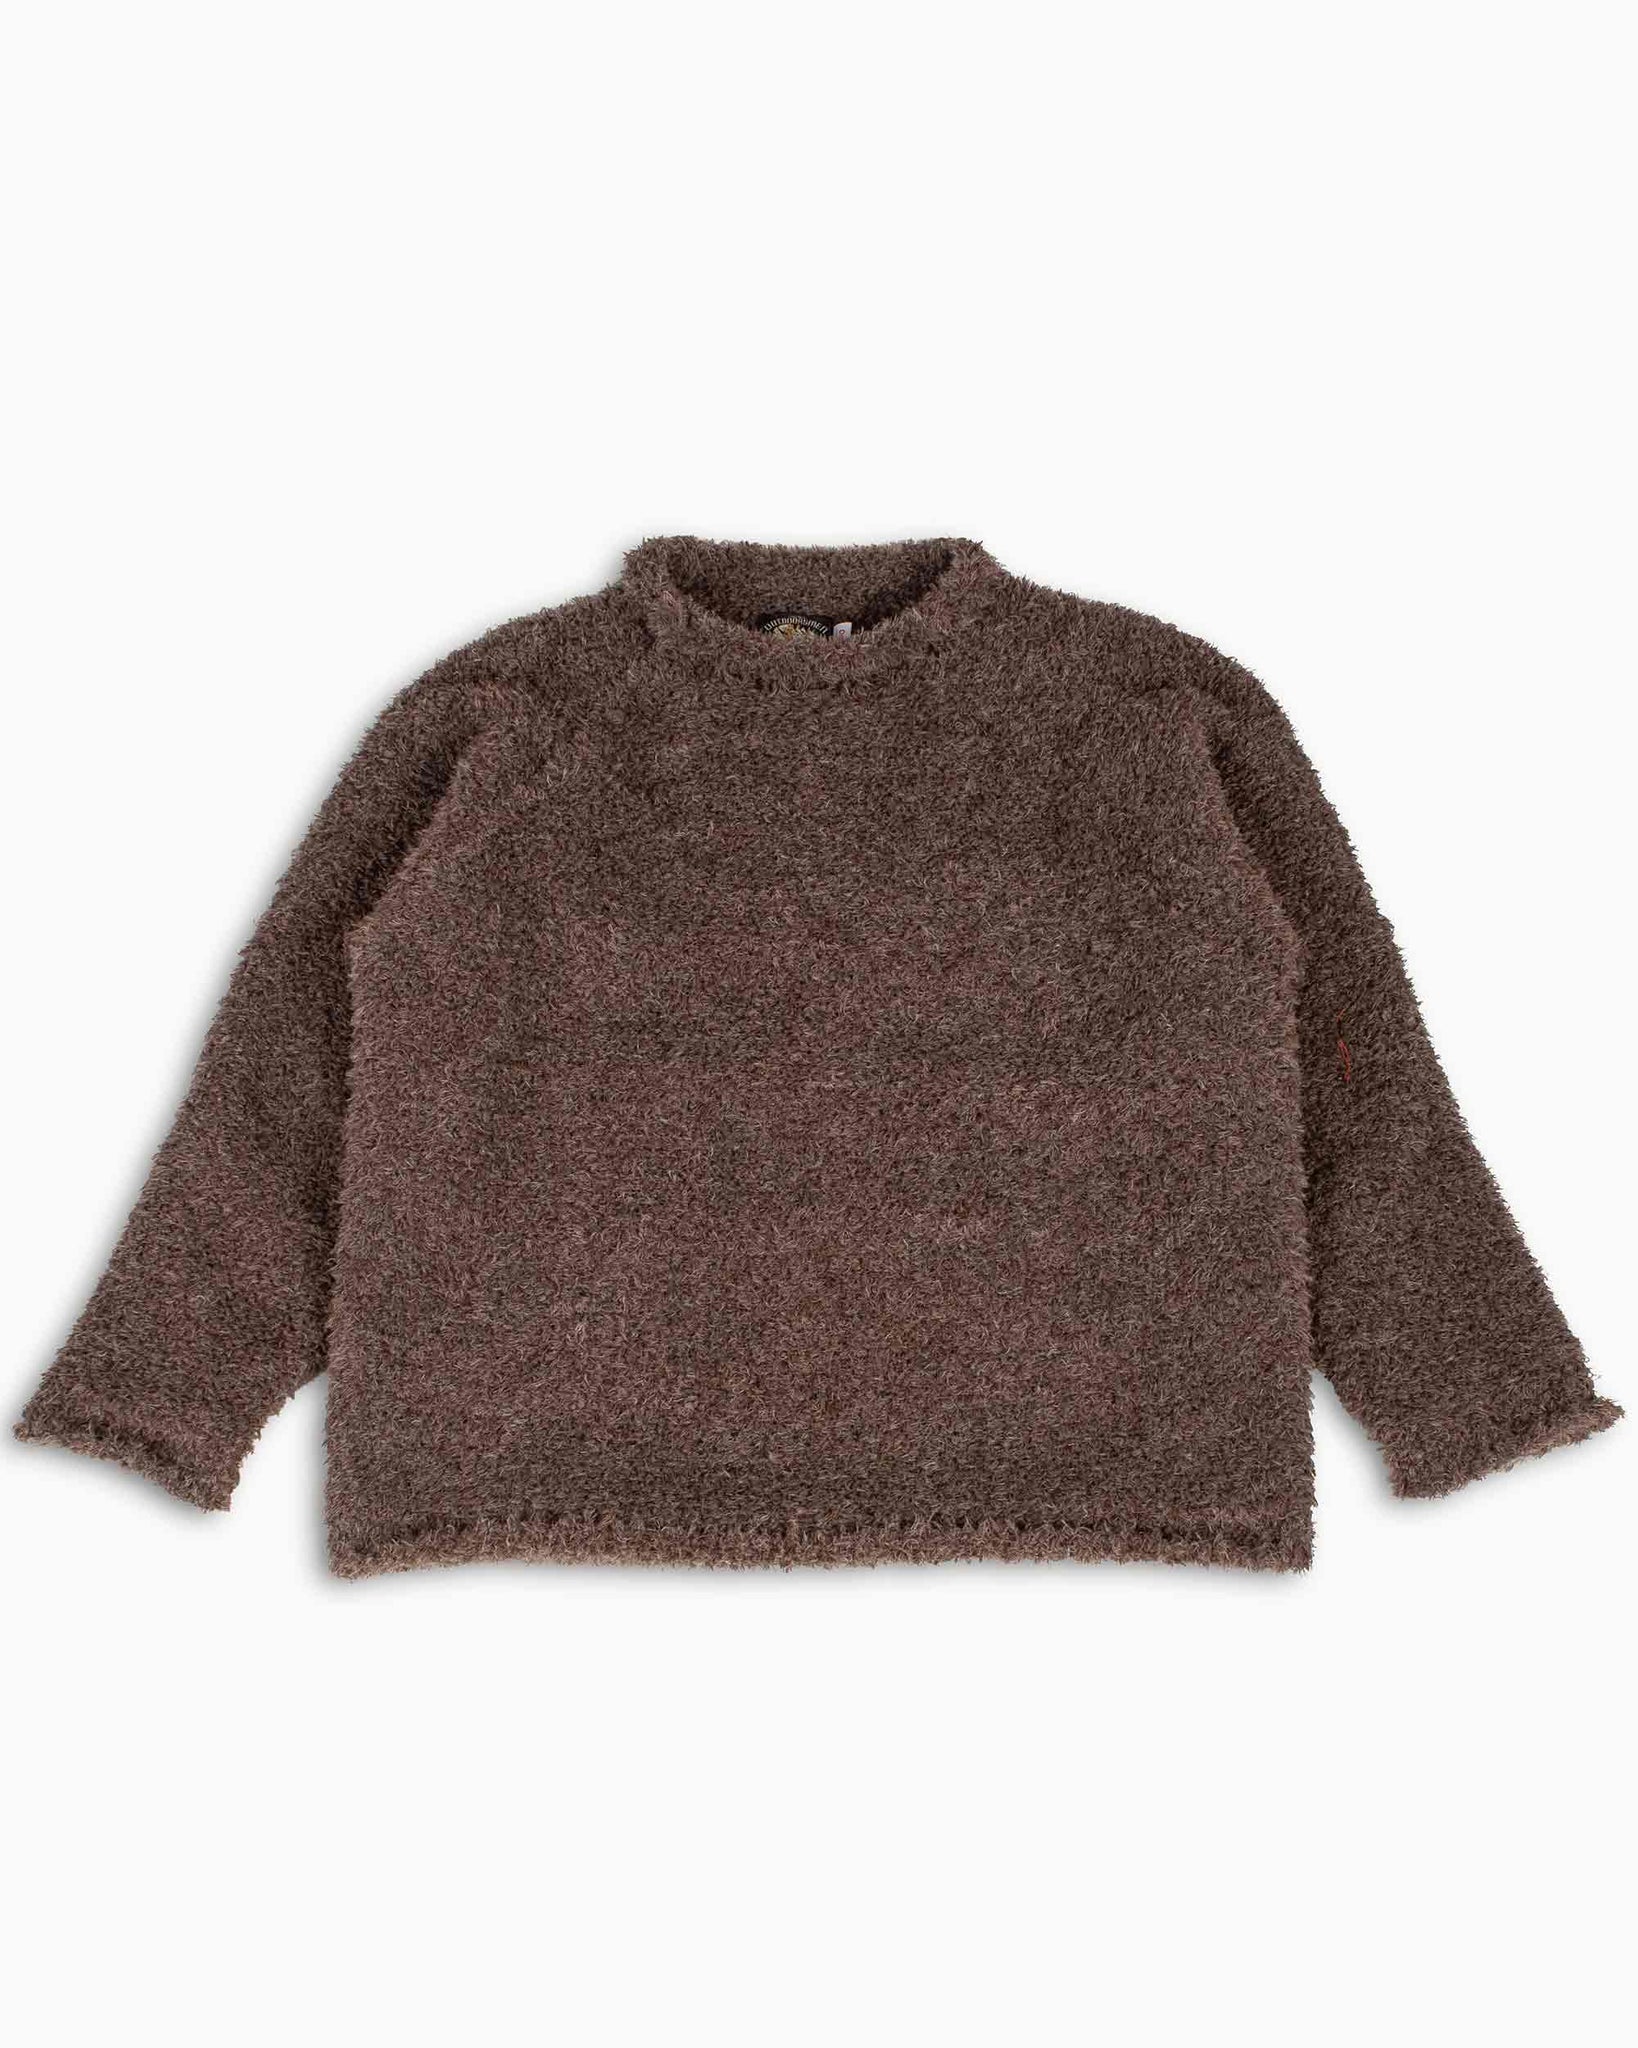 The Real McCoy's MC22123 Mockneck Mole Sweater Brown